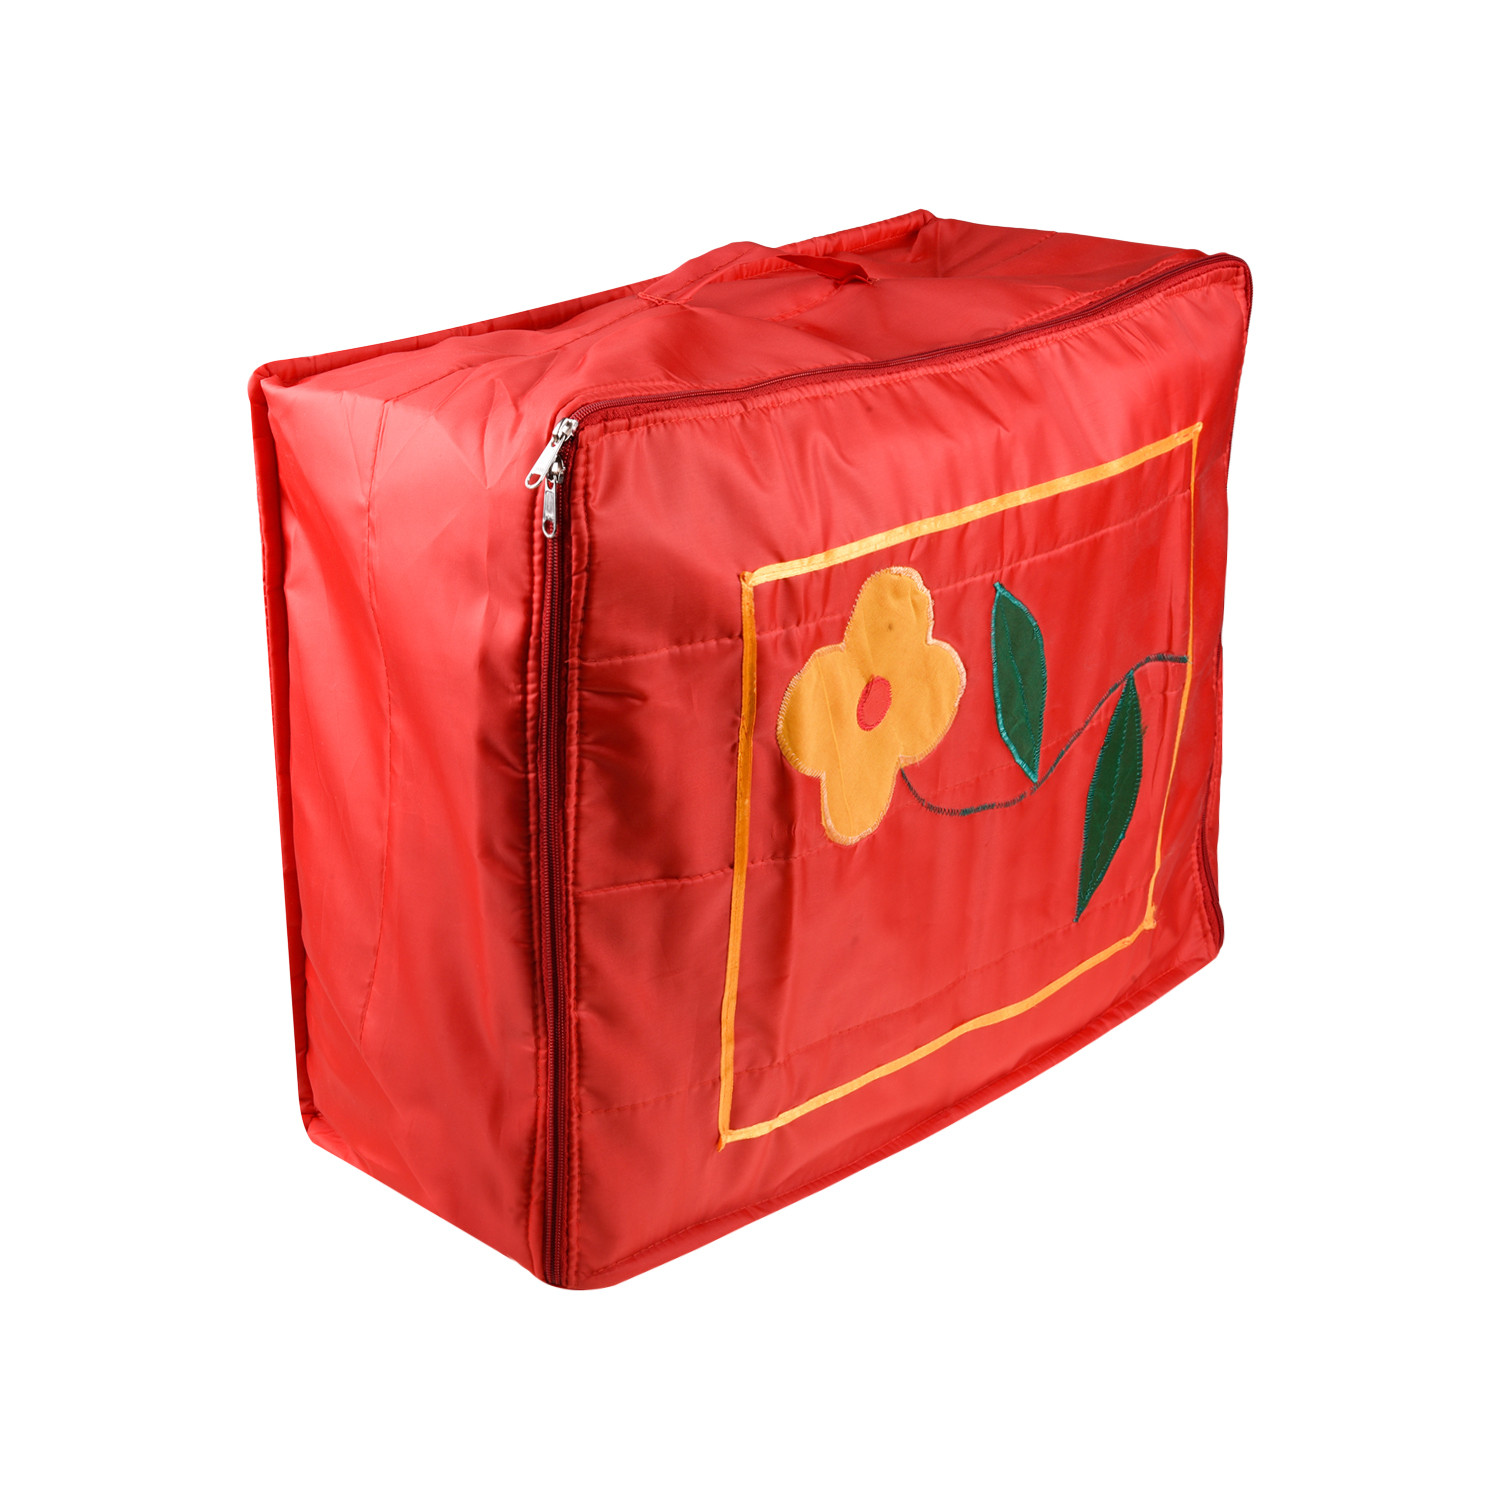 Black Plain Non Woven Saree Cover Storage Bags For Clothes at Rs 25/piece  in Jaipur